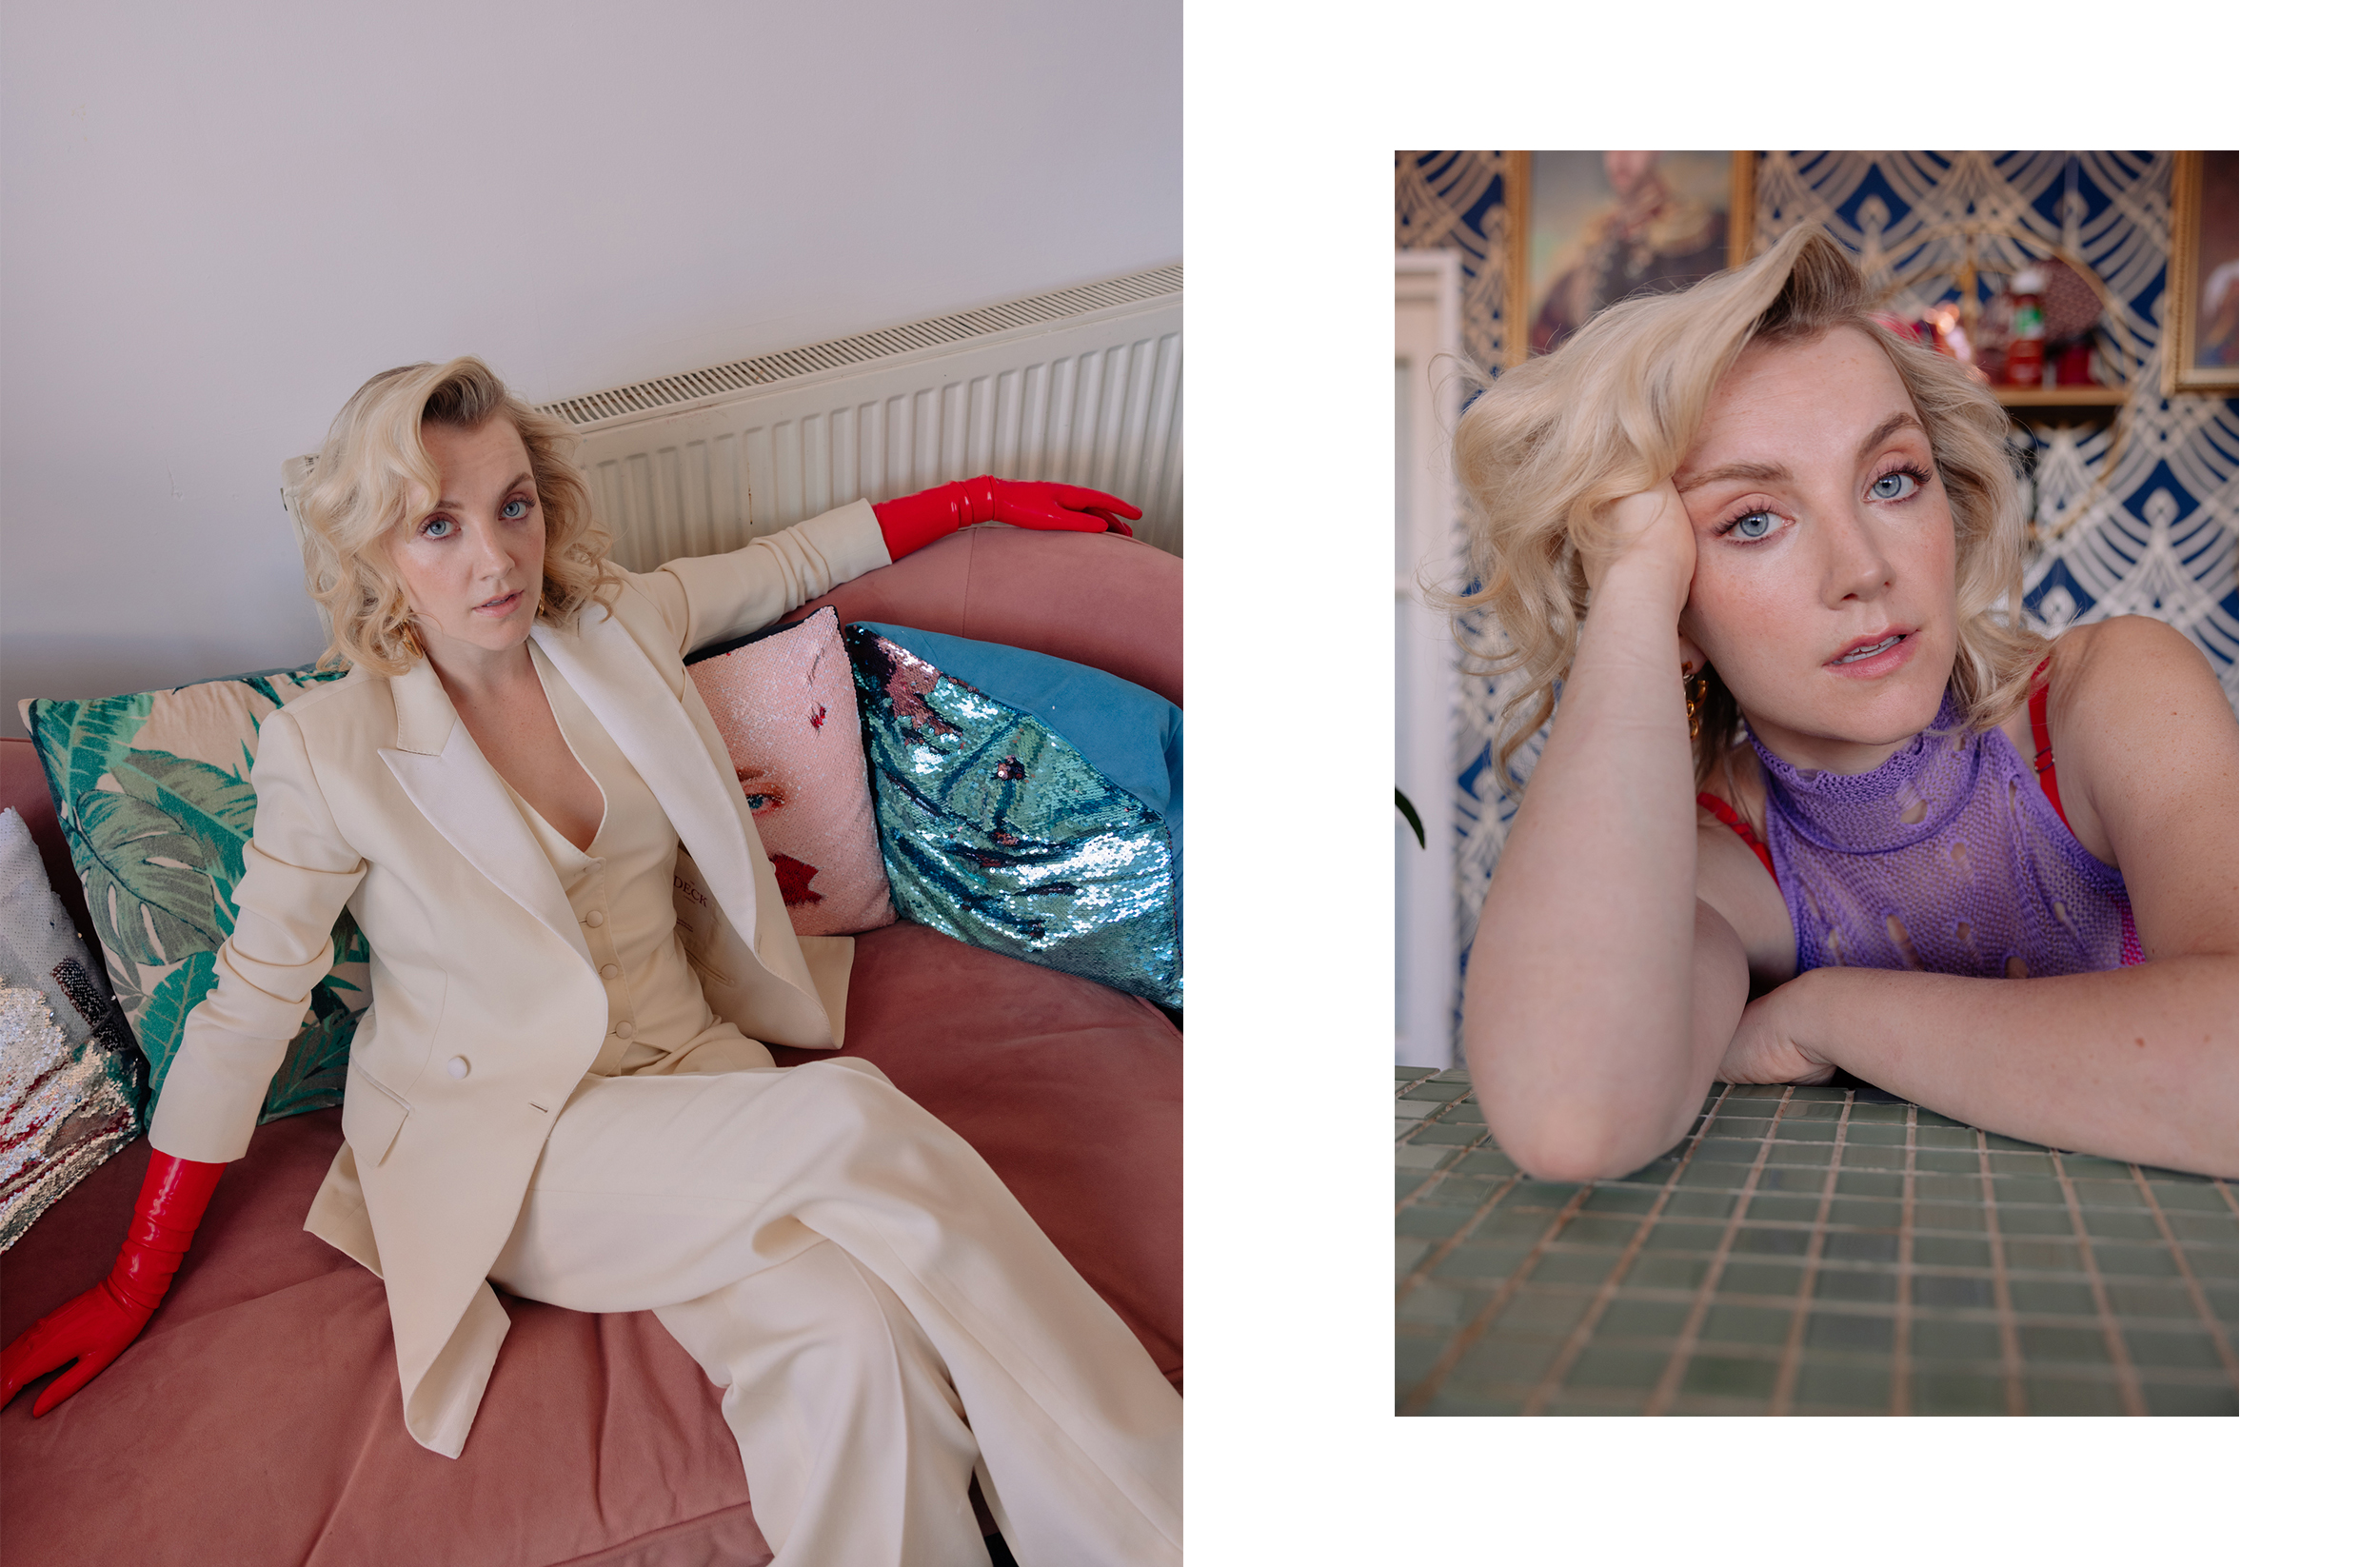 Interview with Evanna Lynch: 'Everything in My Own Words' â€“ The Italian RÃªve